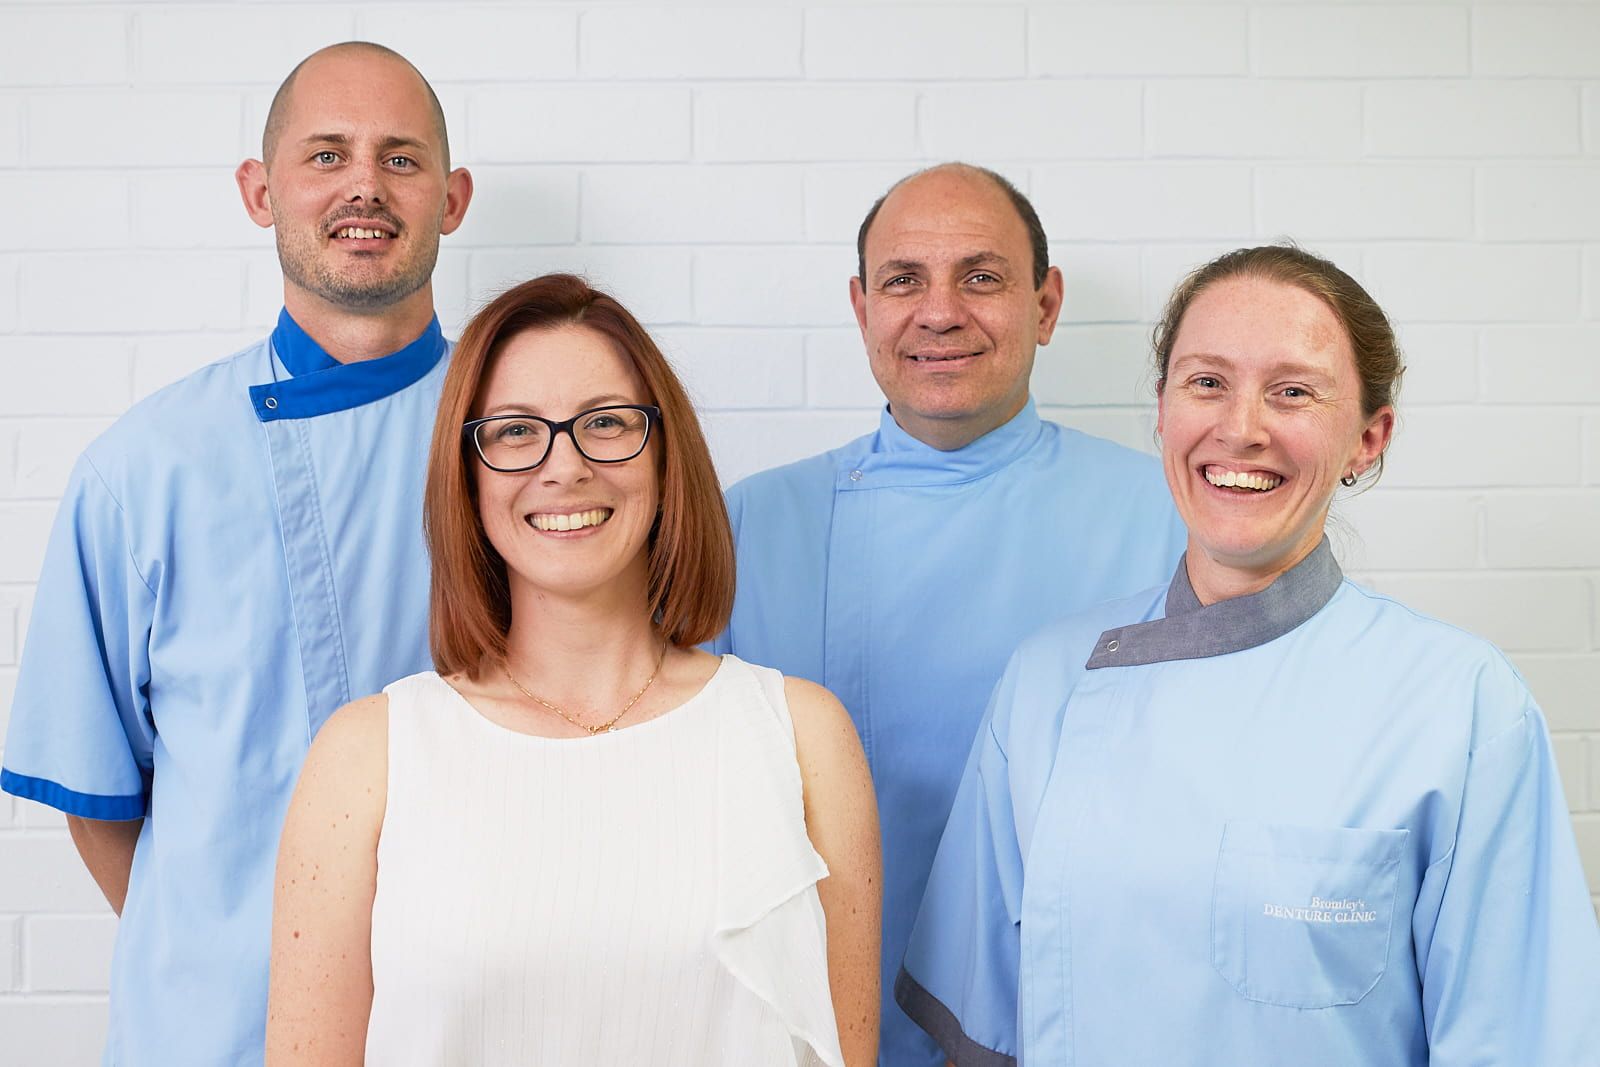 Bromley’s Denture Clinic Team — Bromley's Denture Clinic in Tweed Heads South, NSW